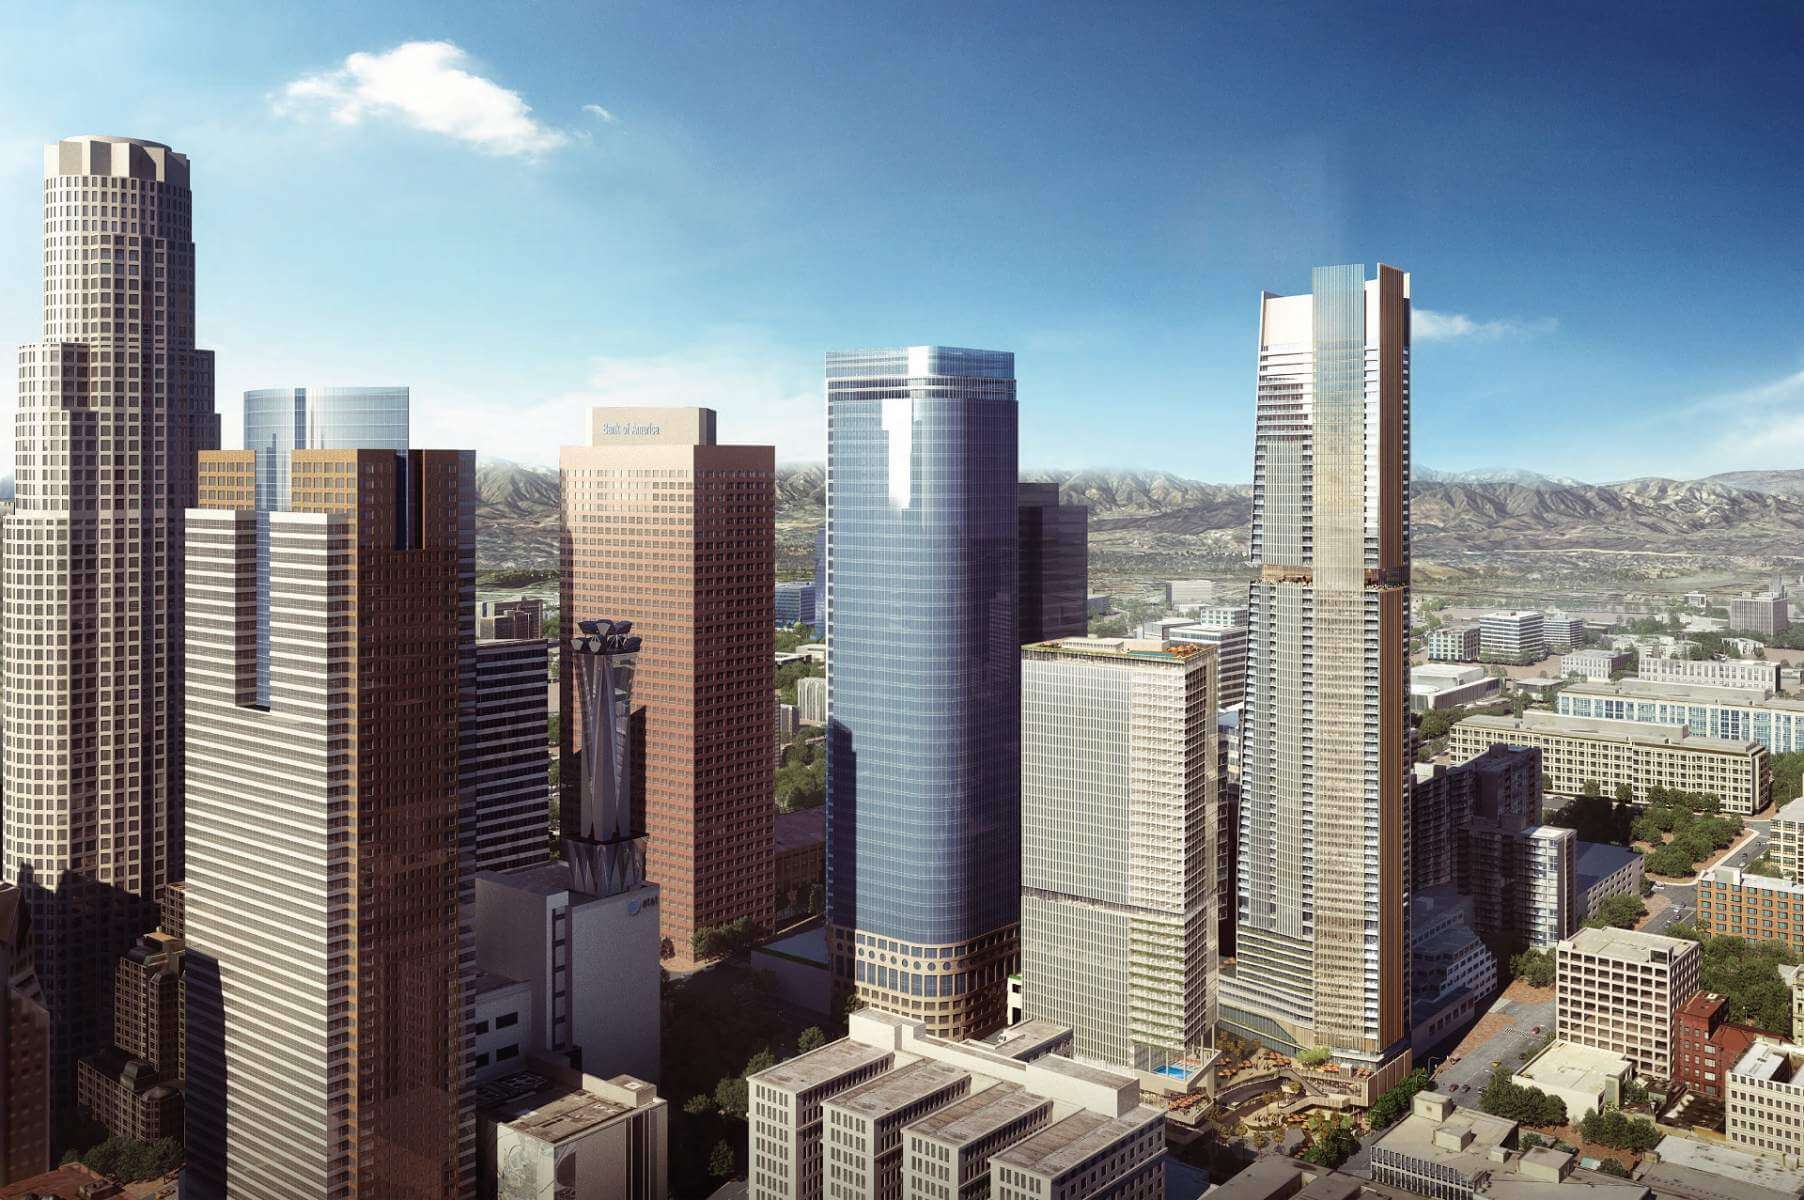 renderng showing two new skyscrapers in downtown la